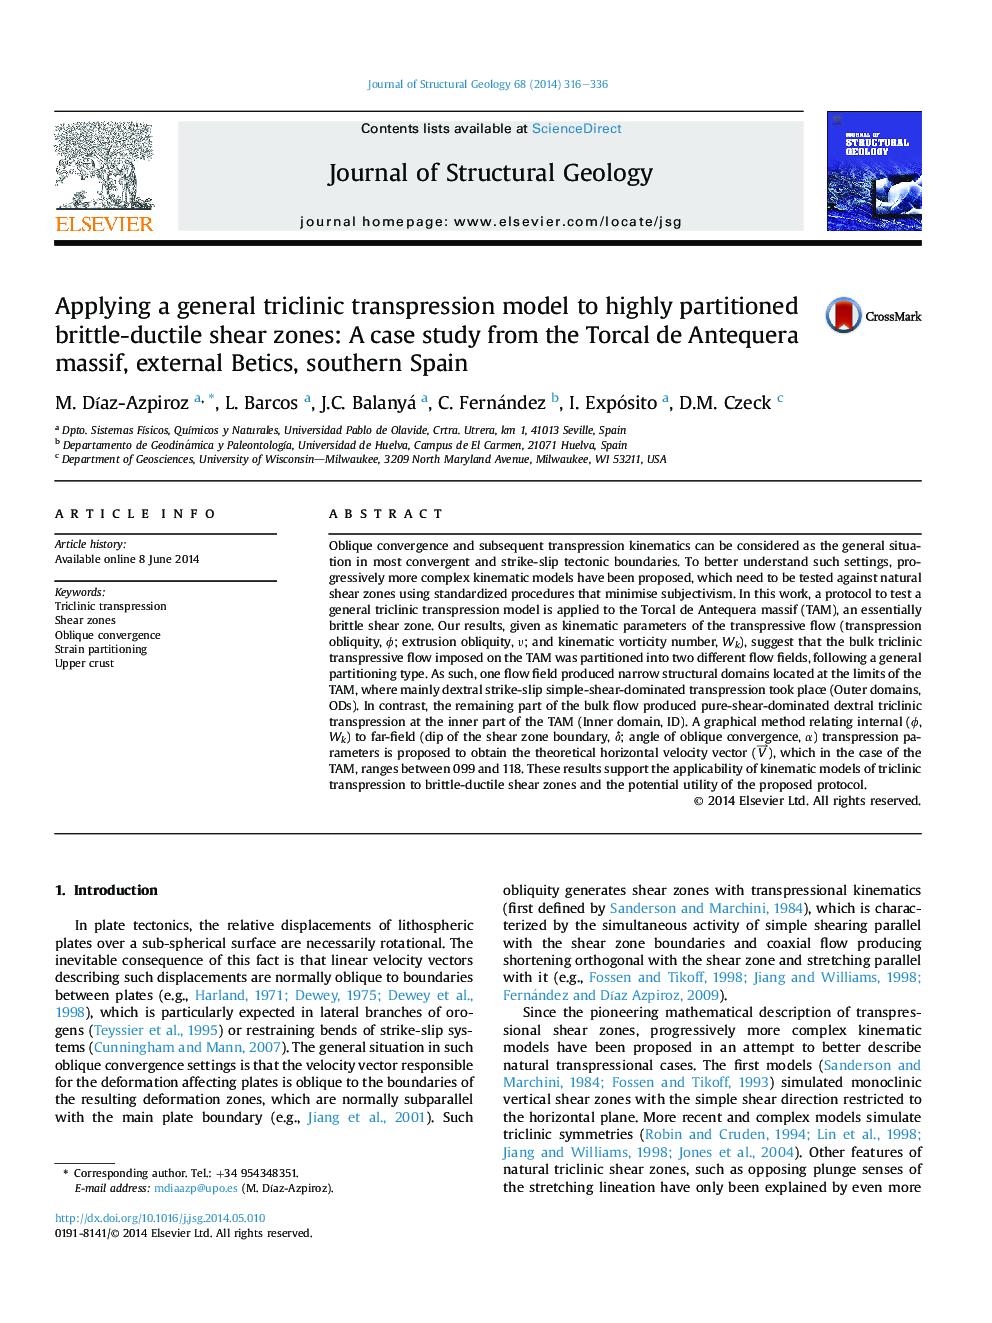 Applying a general triclinic transpression model to highly partitioned brittle-ductile shear zones: A case study from the Torcal de Antequera massif, external Betics, southern Spain